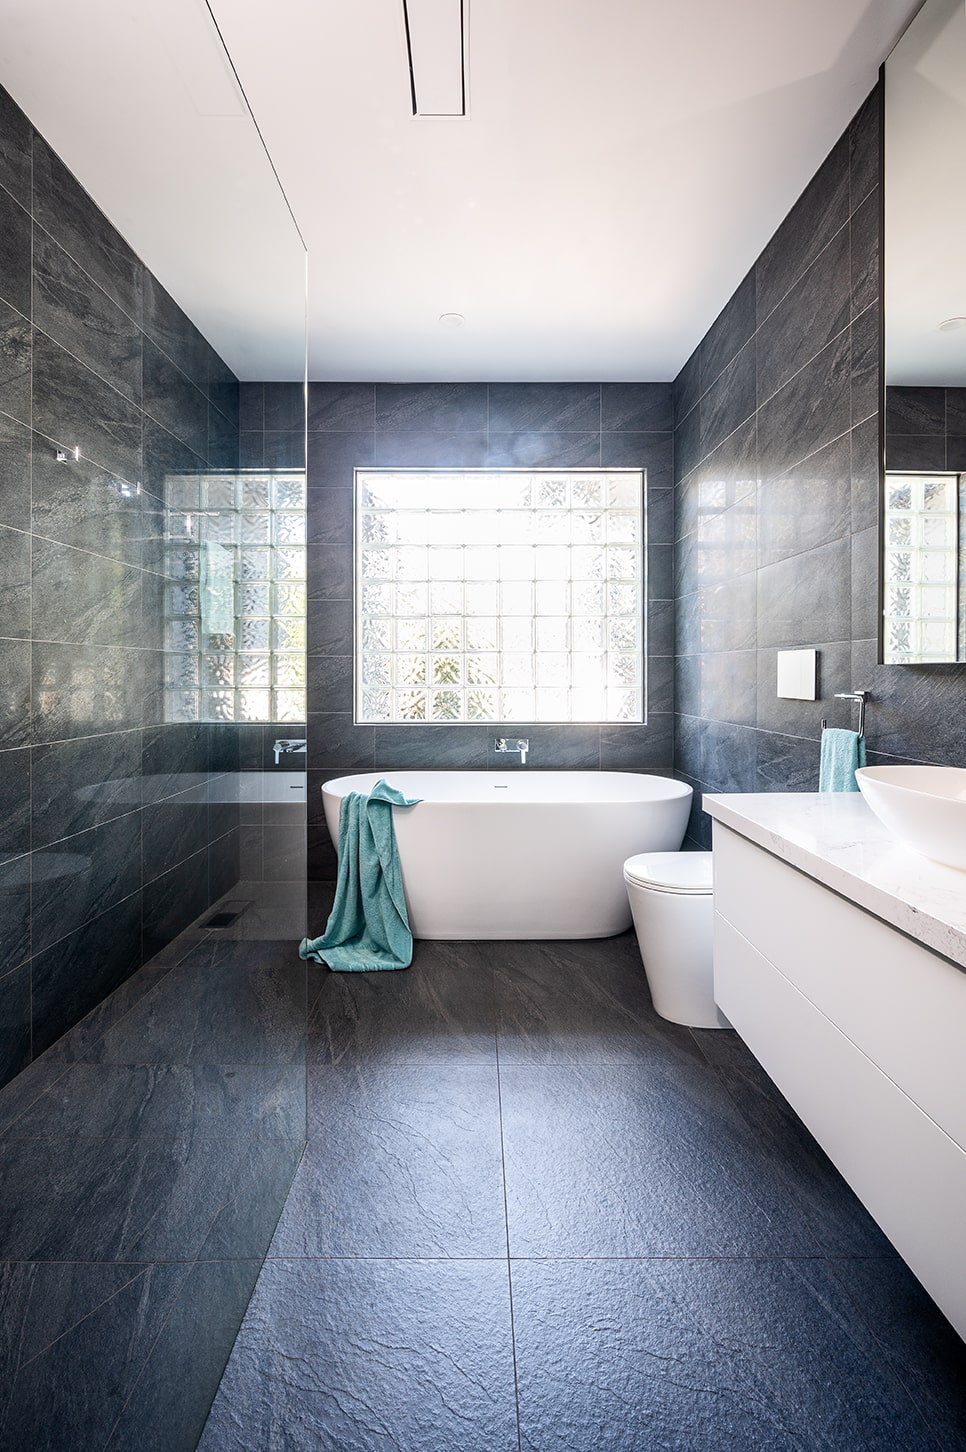 Everything You Need to Know About Glazed Porcelain Tiles